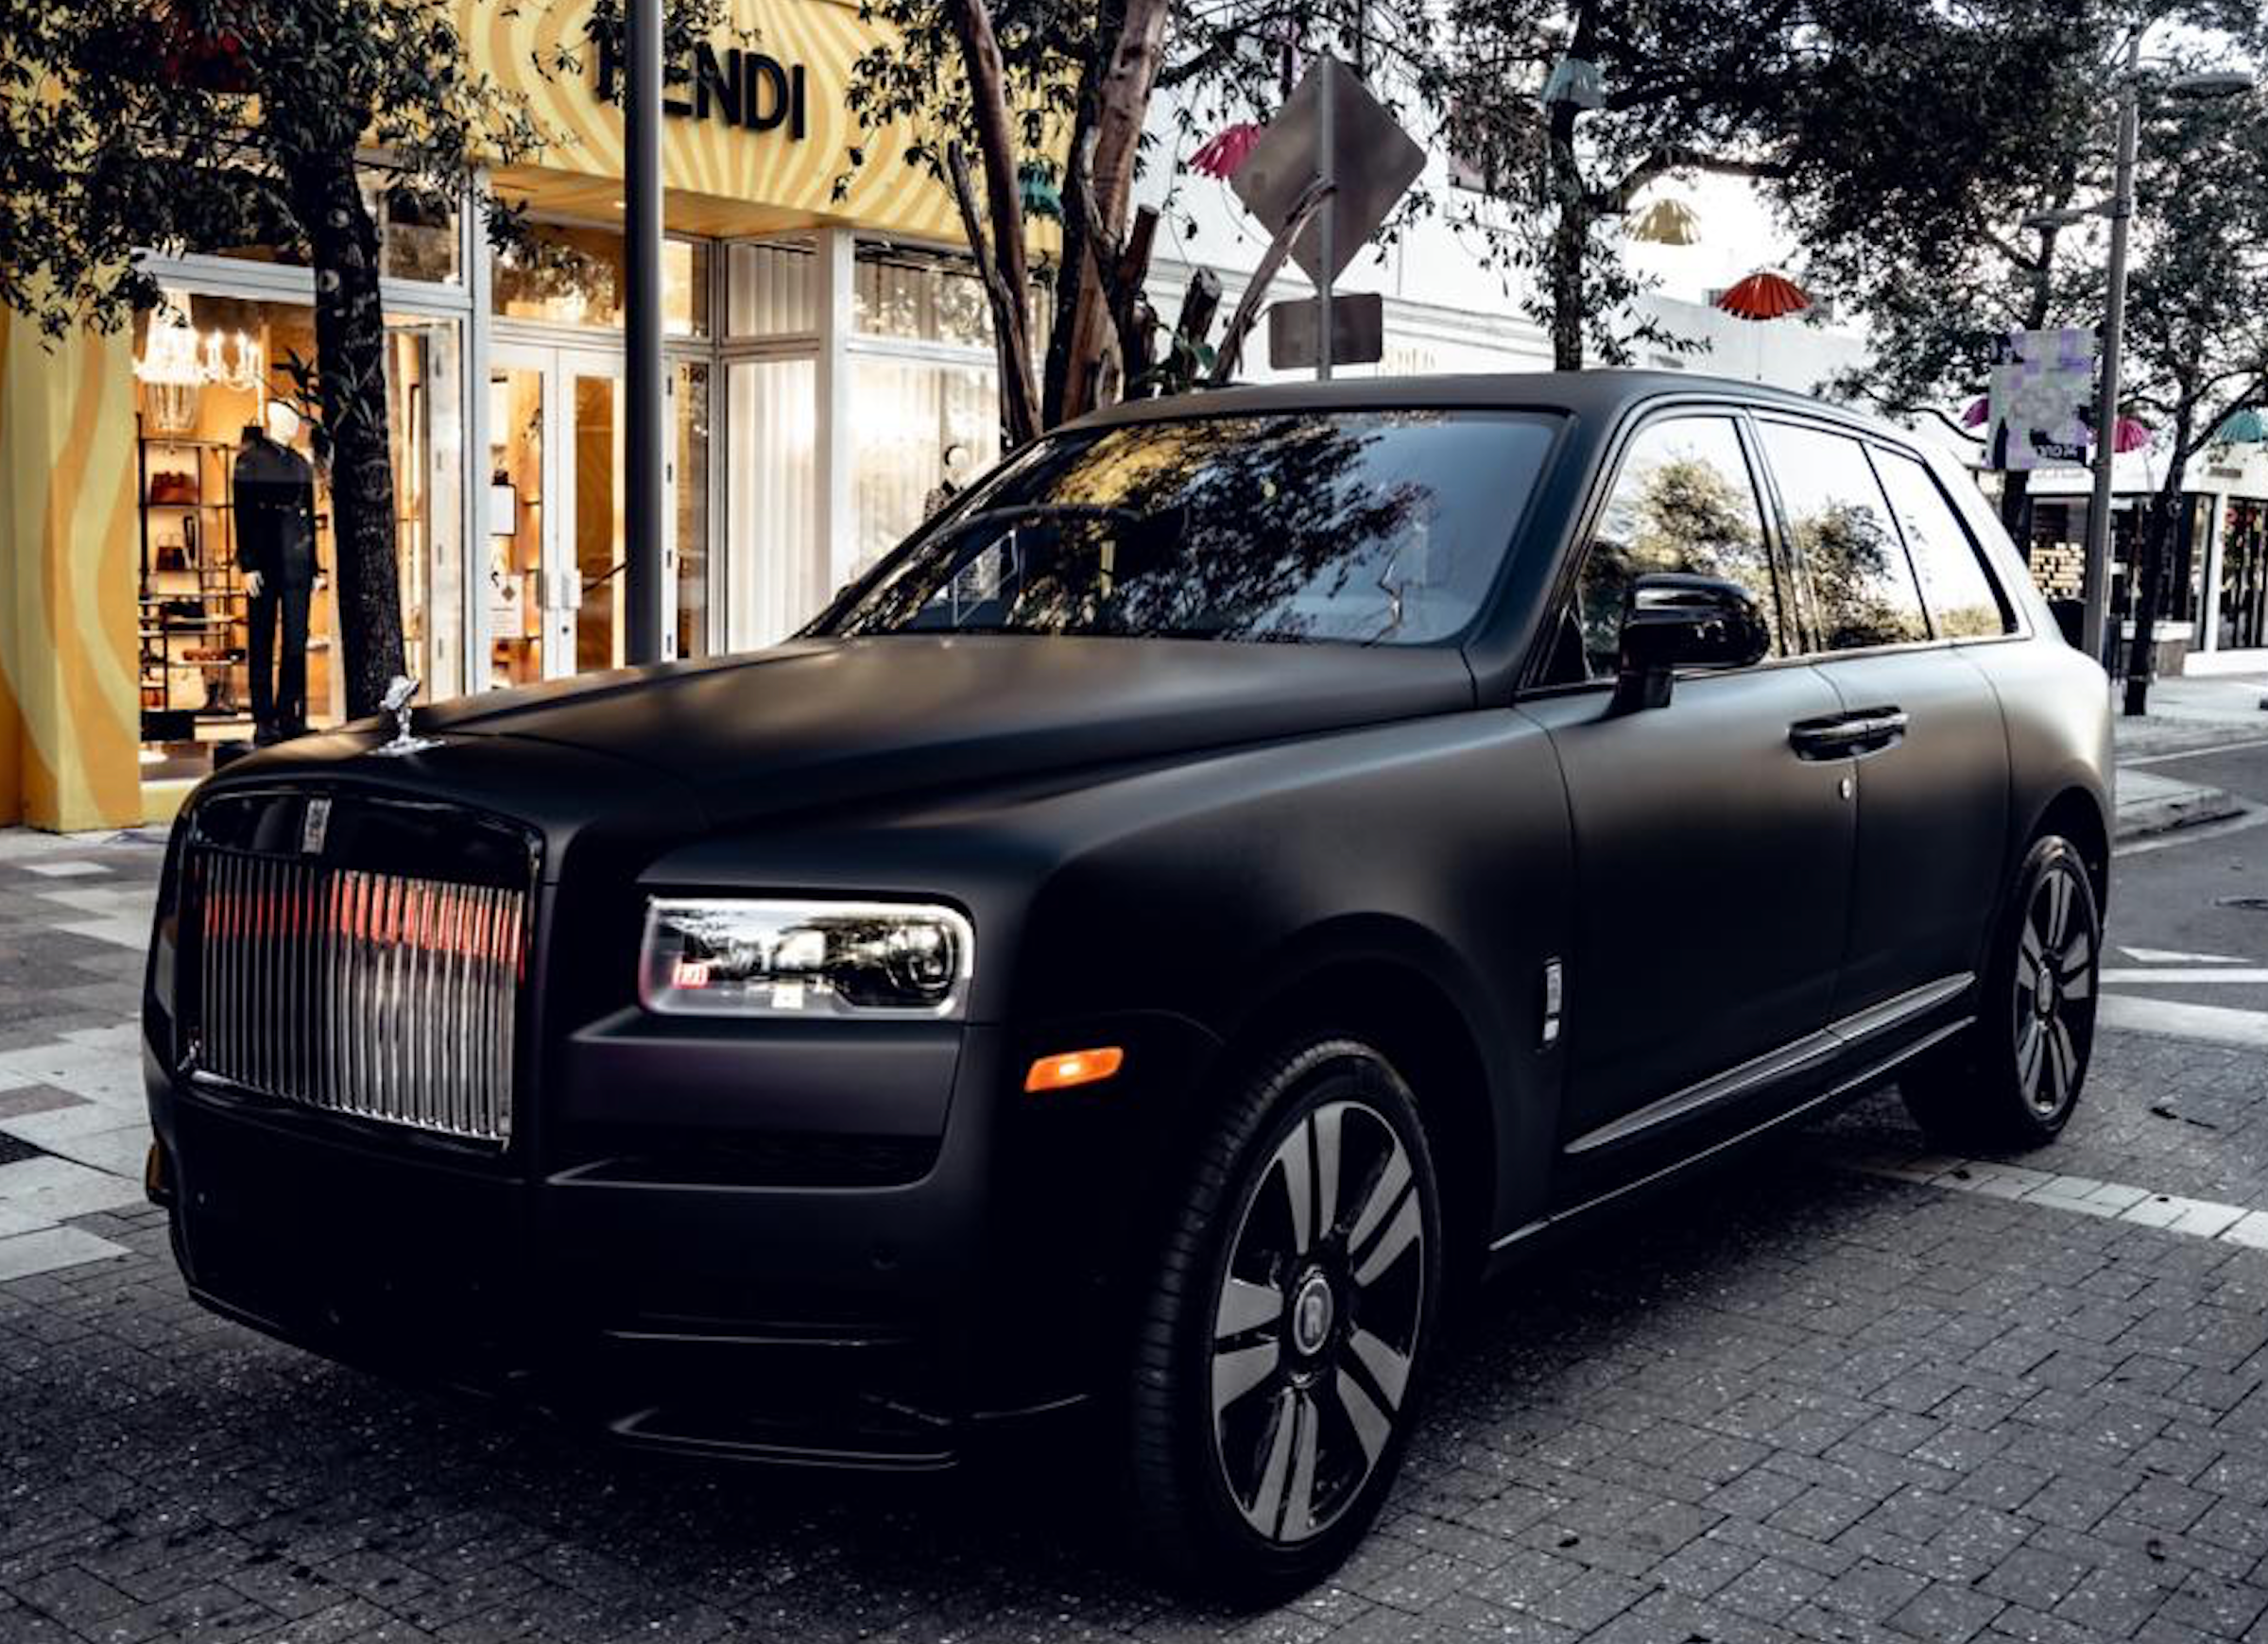 RollsRoyce unveils SUV with 325K price tag  The Seattle Times